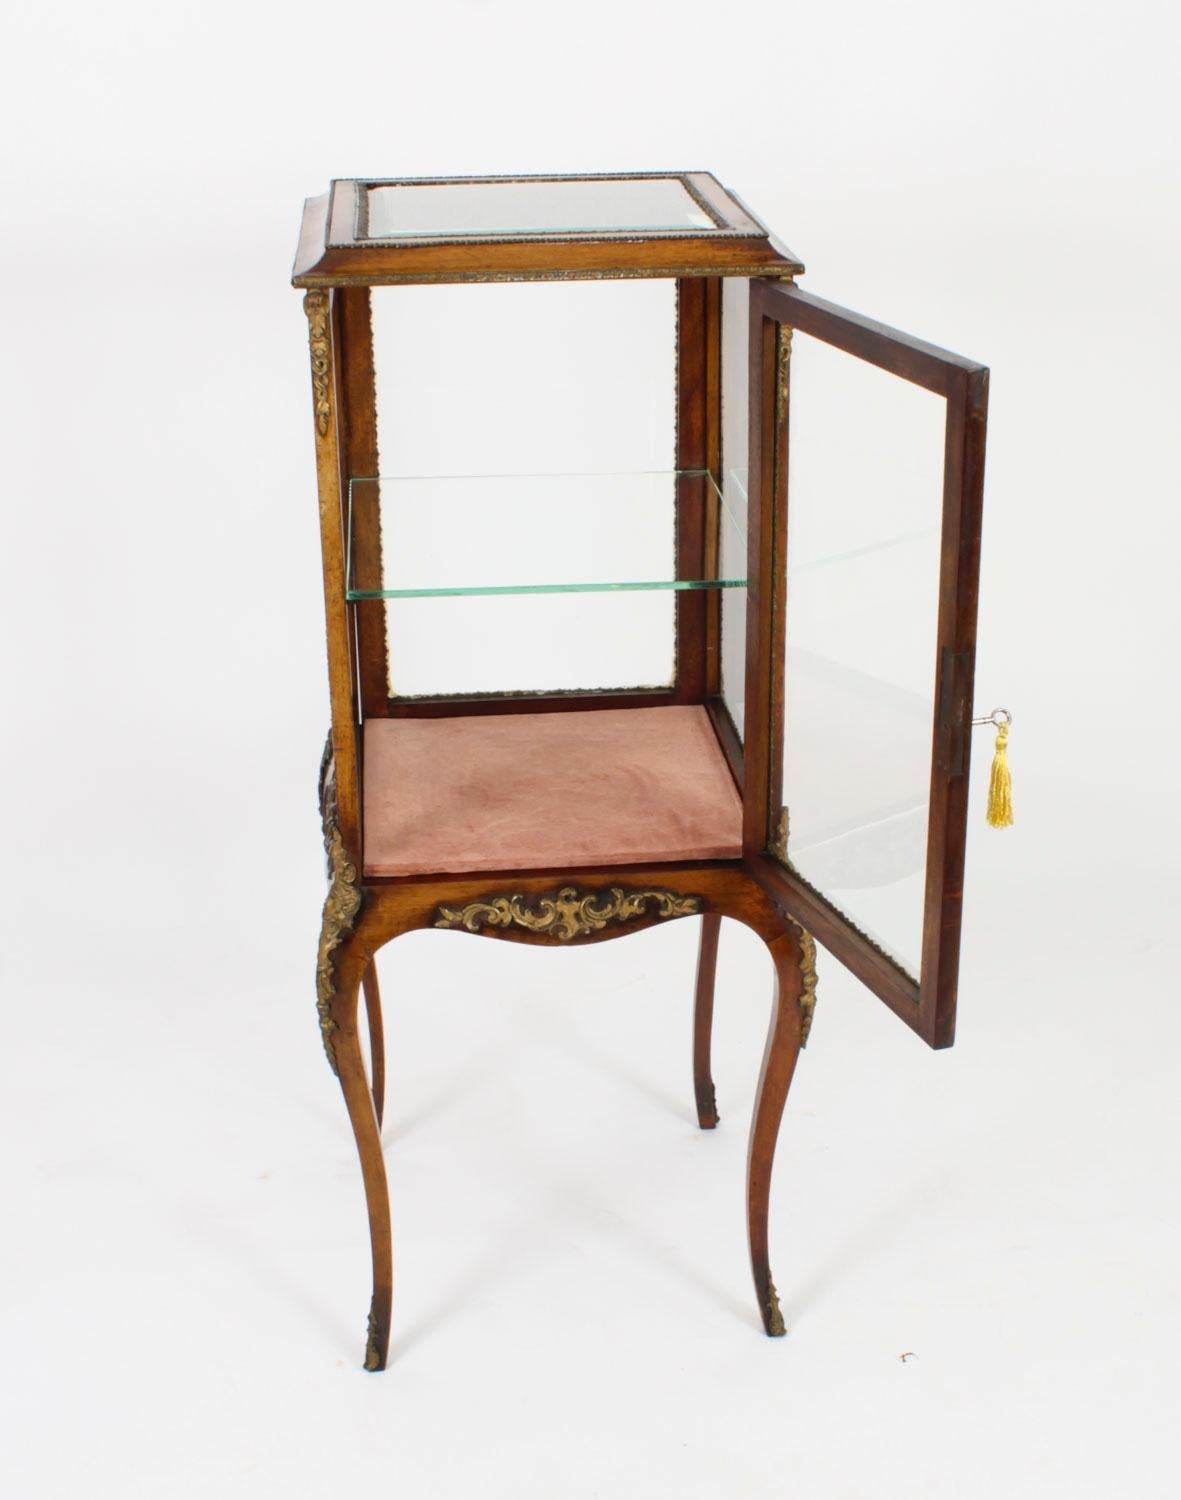 Antique Square Ormolu Mounted Vitrine Display Cabinet 19th Century For Sale 9